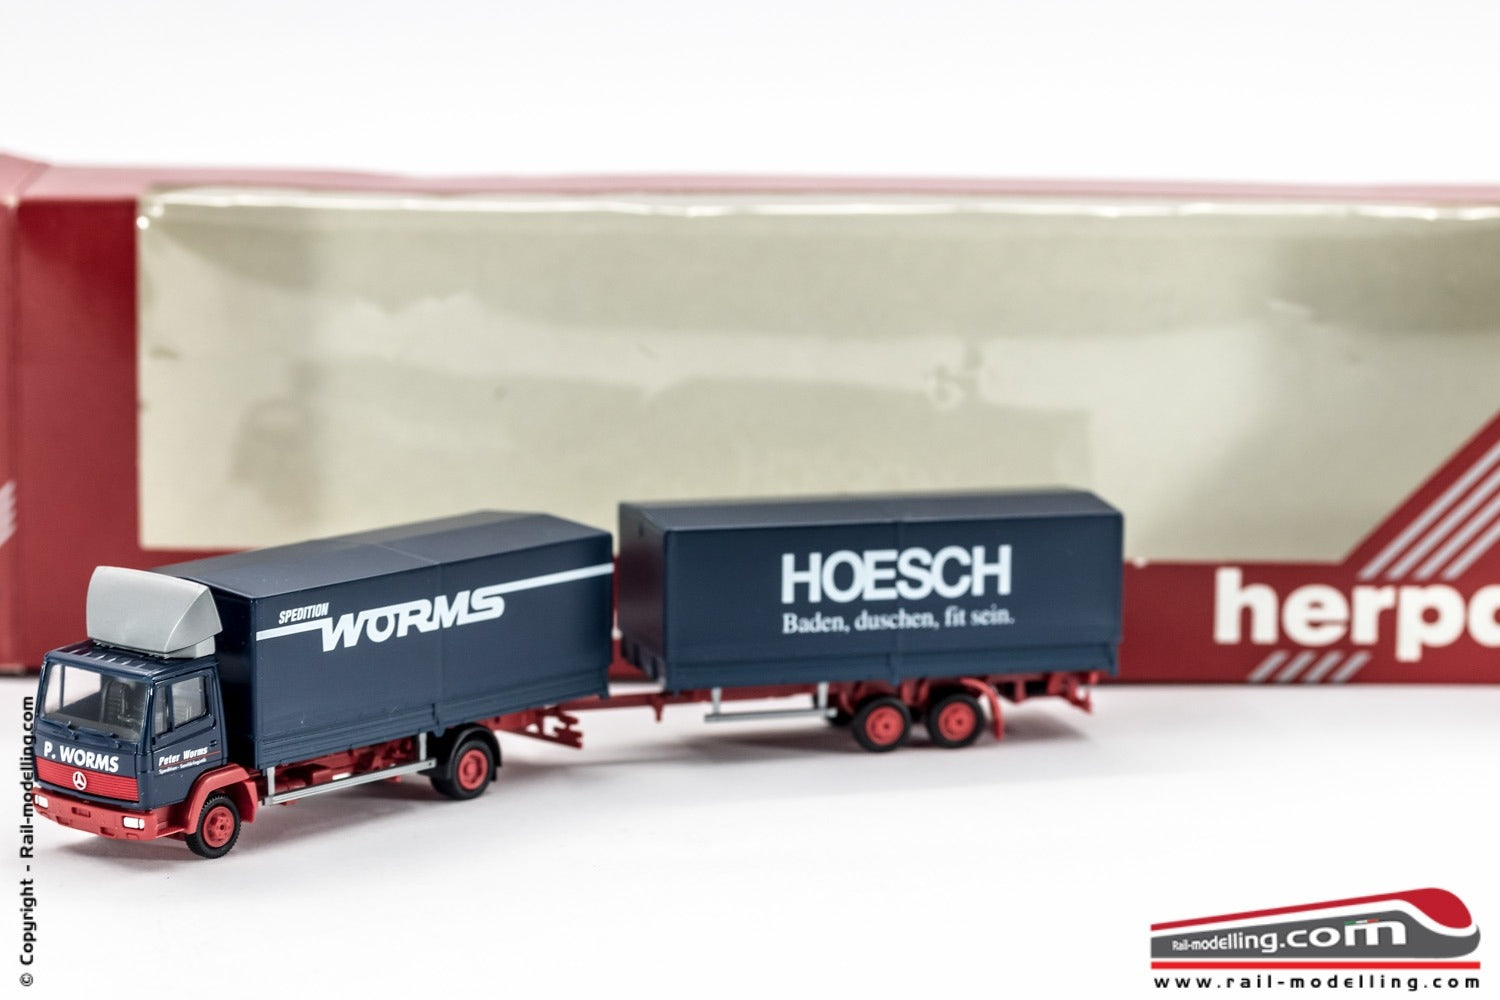 HERPA 144735 - H0 1:87 - Camion rimorchio Merceded Benz 814 Corriere Worms